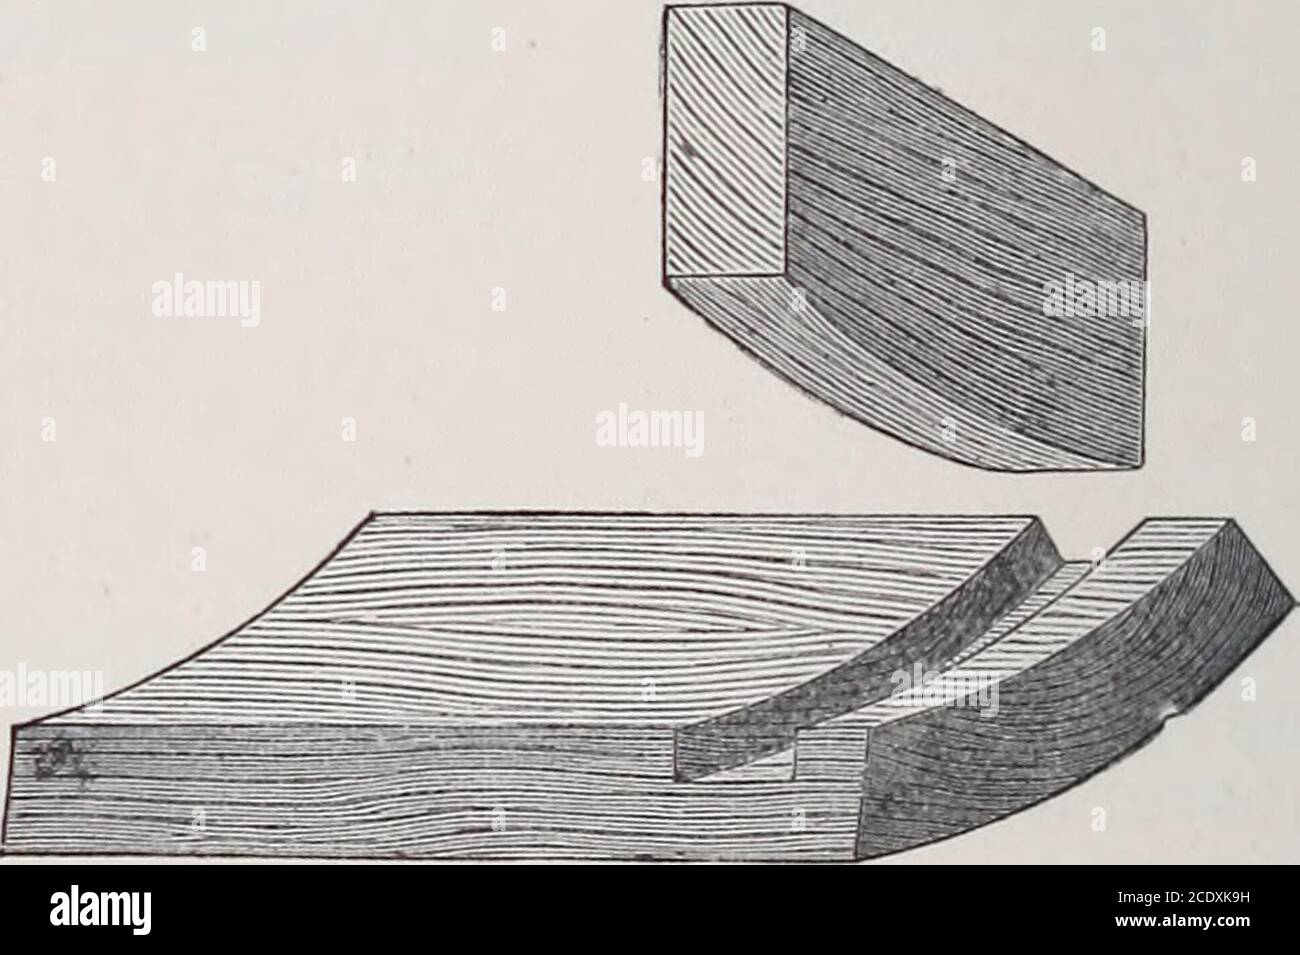 . Teacher's handbook of Slöjd . firmerchisel; oldwomanstooth-plane ;dove-tail saw. 1. The slot is set out with compass, square, and bevel. 2. The depth of the groove is set out with the marking- gauge, and cut out with the knife and firmer chisel. 3. The slot is sawn out with the dove-tail saw, and cut out with the firmer chisel. 4. The parts are fitted together with the aid of the firmer chisel. The groove is set out with compass, square, marking-point, bevel, and cutting-gauge; and cut out withknife, tenon-saw or groove-saw, firmer chisel, and oldwomans tooth-plane. The shape of the dove-tai Stock Photo